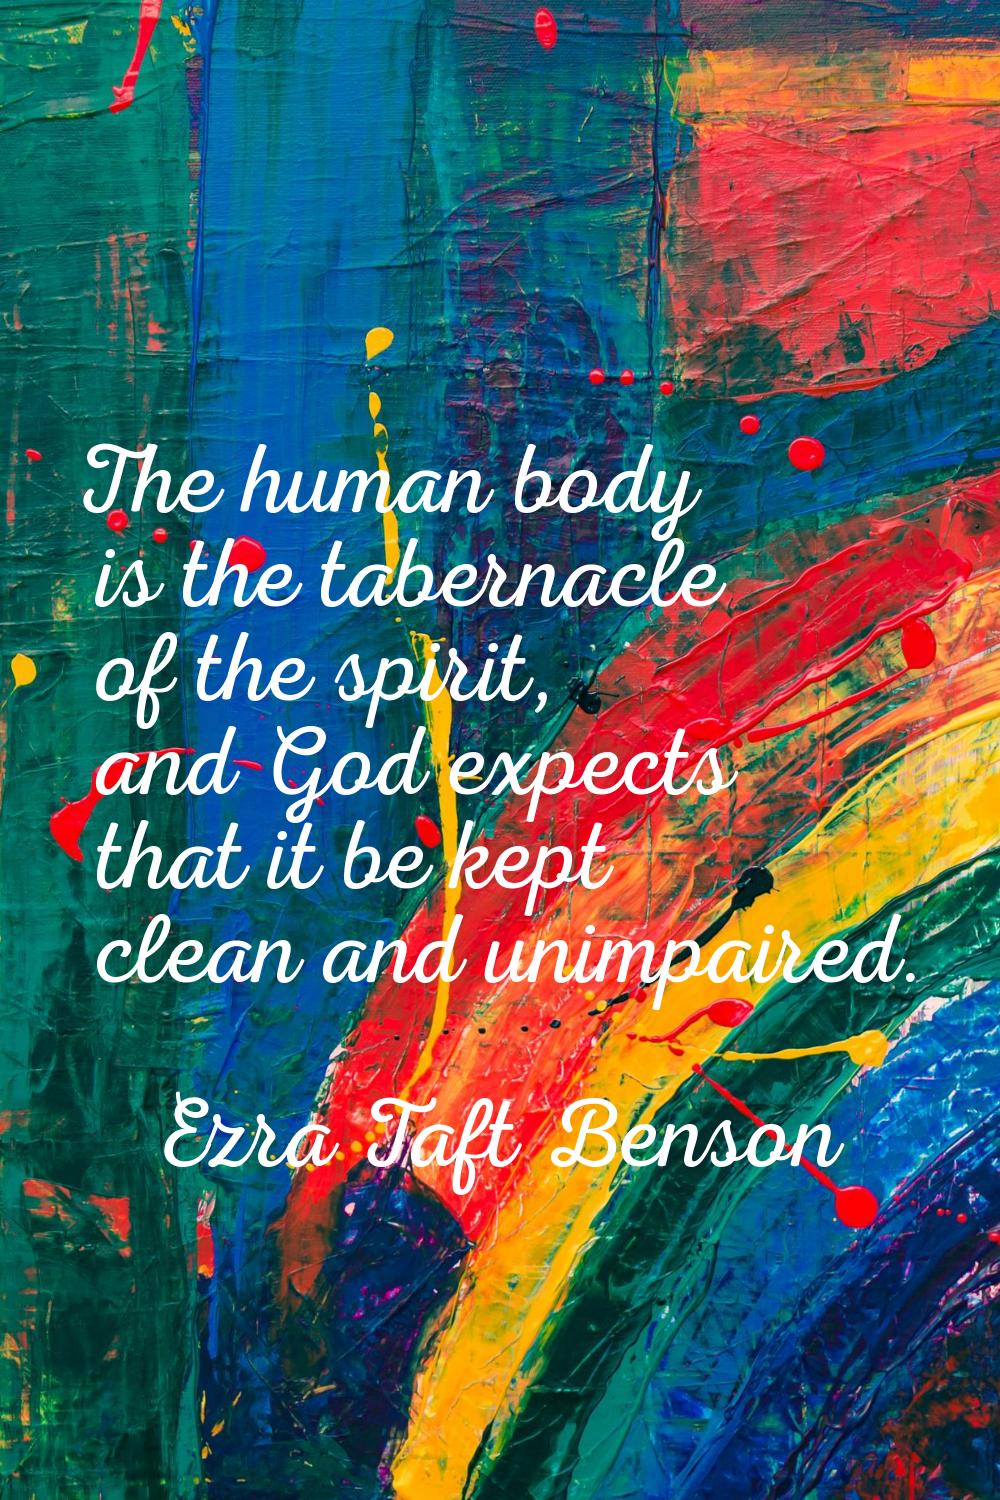 The human body is the tabernacle of the spirit, and God expects that it be kept clean and unimpaire